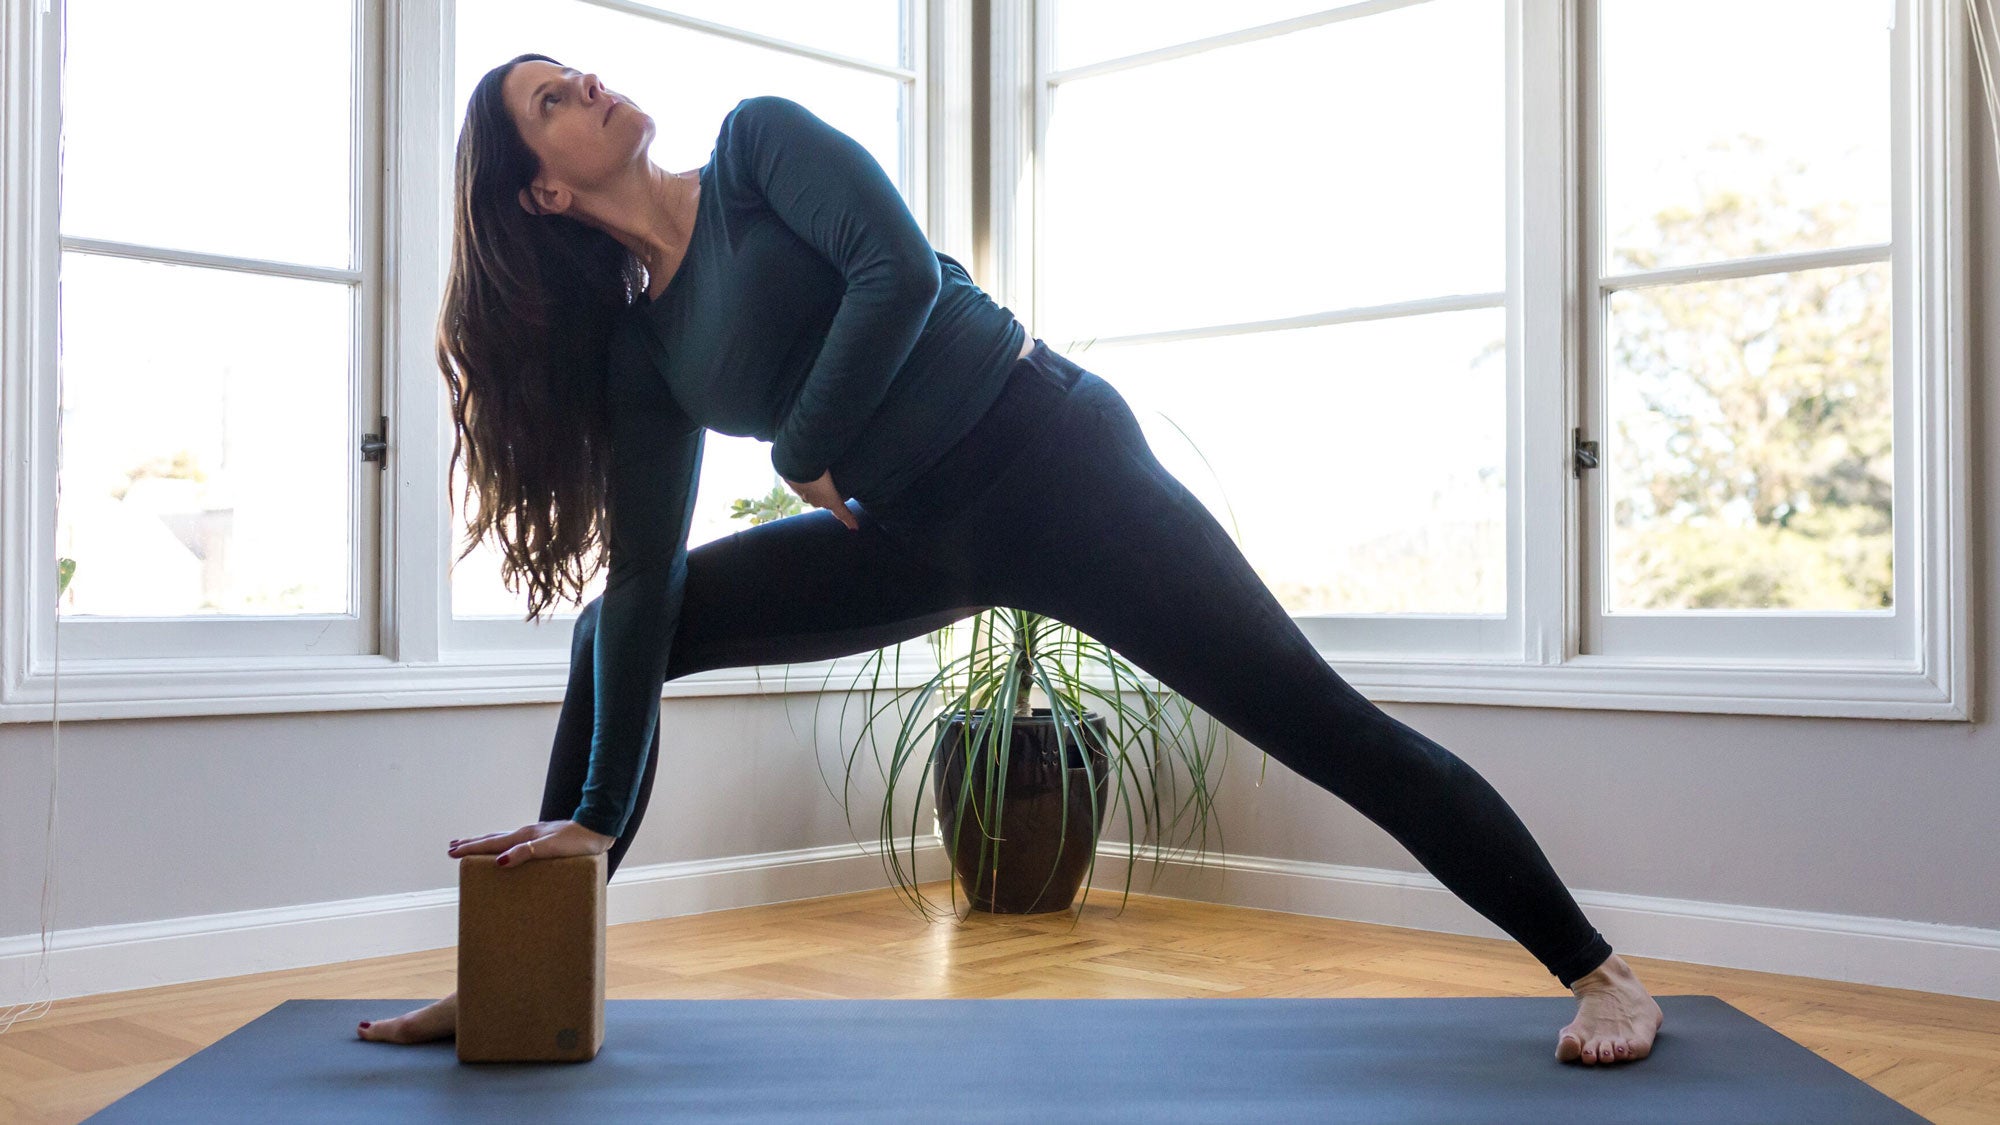 Yoga Sequence For After Abortion, Miscarriage, or Pregnancy Loss